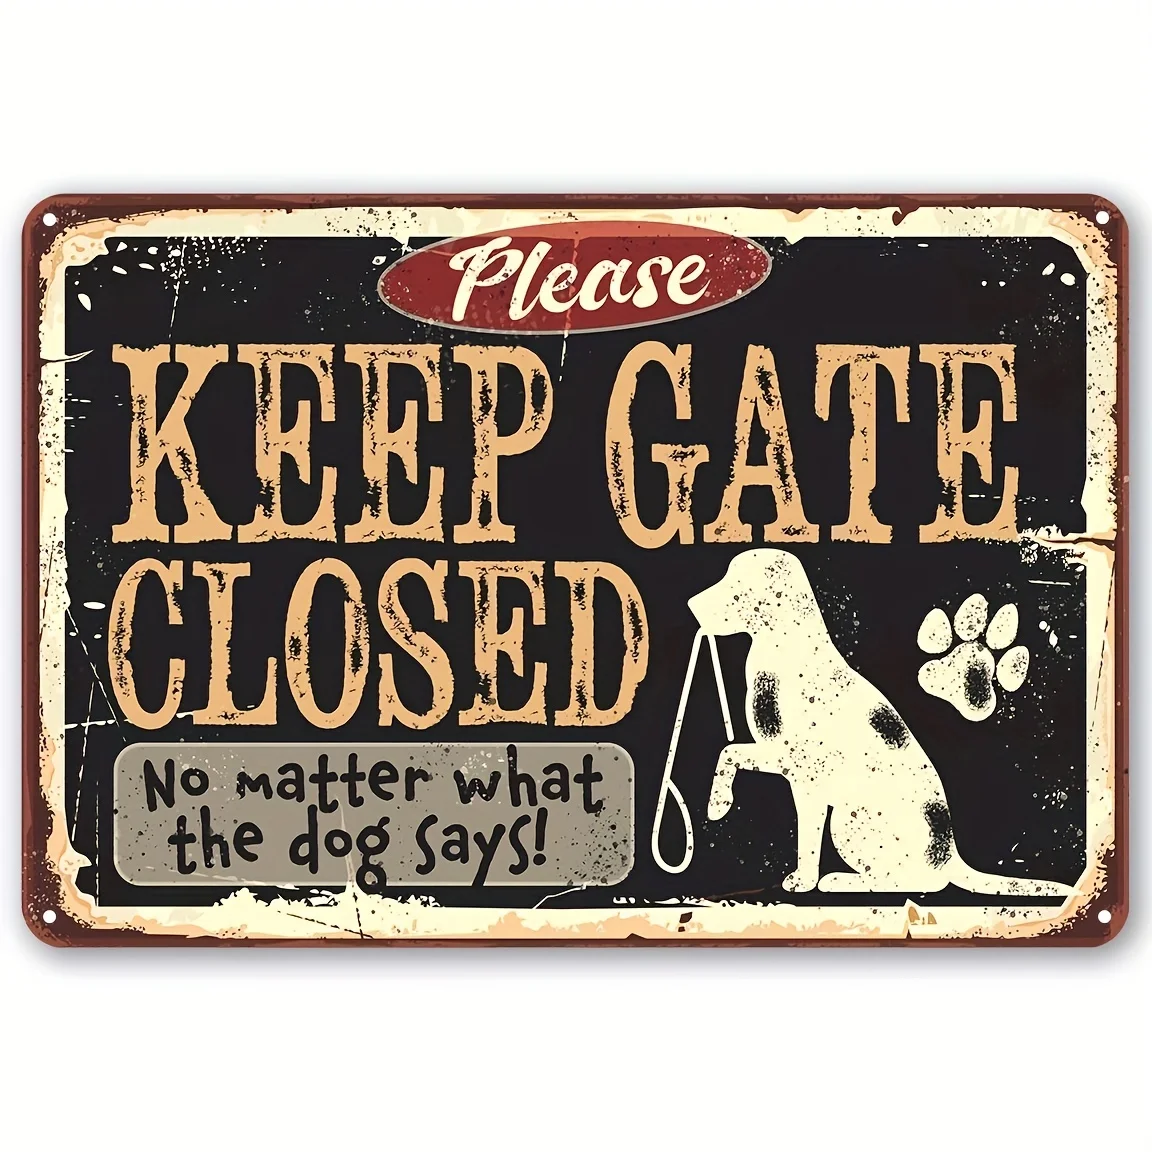 

Dog Decor - Keep Gate Closed Dog - Metal Dog Signs For Home Decor - Use Indoor/Outdoor - Dog Sayings Funny Signs - Dog Mom Gifts